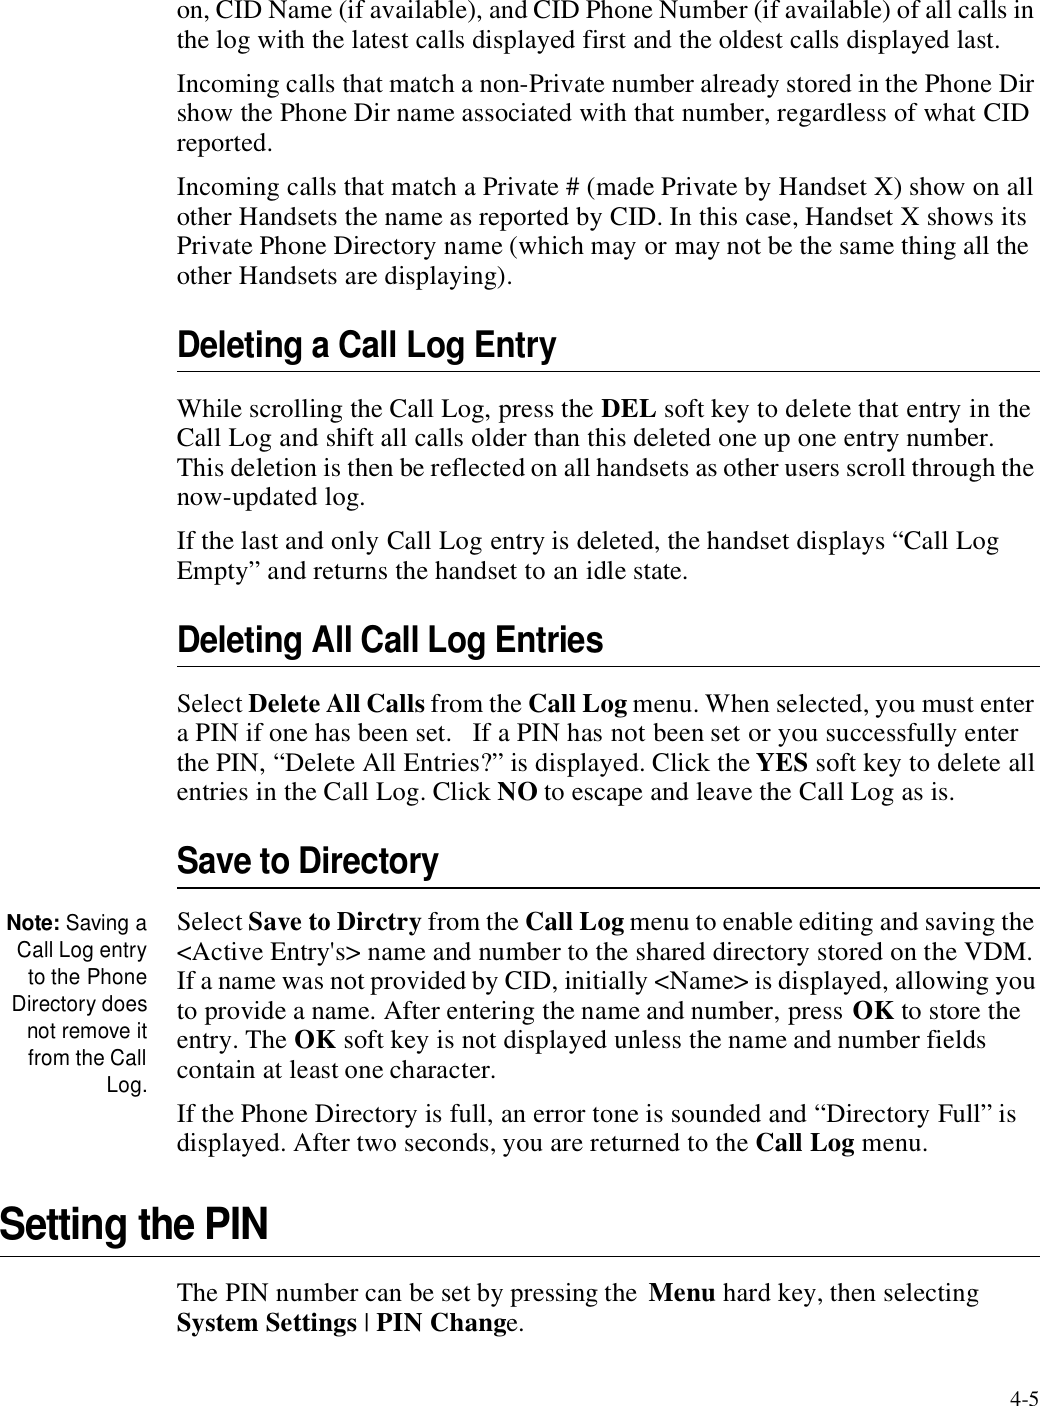 4-5on, CID Name (if available), and CID Phone Number (if available) of all calls in the log with the latest calls displayed first and the oldest calls displayed last.Incoming calls that match a non-Private number already stored in the Phone Dir show the Phone Dir name associated with that number, regardless of what CID reported. Incoming calls that match a Private # (made Private by Handset X) show on all other Handsets the name as reported by CID. In this case, Handset X shows its Private Phone Directory name (which may or may not be the same thing all the other Handsets are displaying). Deleting a Call Log EntryWhile scrolling the Call Log, press the DEL soft key to delete that entry in the Call Log and shift all calls older than this deleted one up one entry number.   This deletion is then be reflected on all handsets as other users scroll through the now-updated log.If the last and only Call Log entry is deleted, the handset displays “Call Log Empty” and returns the handset to an idle state.Deleting All Call Log EntriesSelect Delete All Calls from the Call Log menu. When selected, you must enter a PIN if one has been set.   If a PIN has not been set or you successfully enter the PIN, “Delete All Entries?” is displayed. Click the YES soft key to delete all entries in the Call Log. Click NO to escape and leave the Call Log as is.Save to DirectoryNote: Saving aCall Log entryto the PhoneDirectory doesnot remove itfrom the CallLog.Select Save to Dirctry from the Call Log menu to enable editing and saving the &lt;Active Entry&apos;s&gt; name and number to the shared directory stored on the VDM. If a name was not provided by CID, initially &lt;Name&gt; is displayed, allowing you to provide a name. After entering the name and number, press OK to store the entry. The OK soft key is not displayed unless the name and number fields contain at least one character.If the Phone Directory is full, an error tone is sounded and “Directory Full” is displayed. After two seconds, you are returned to the Call Log menu. Setting the PINThe PIN number can be set by pressing the  Menu hard key, then selecting System Settings | PIN Change.